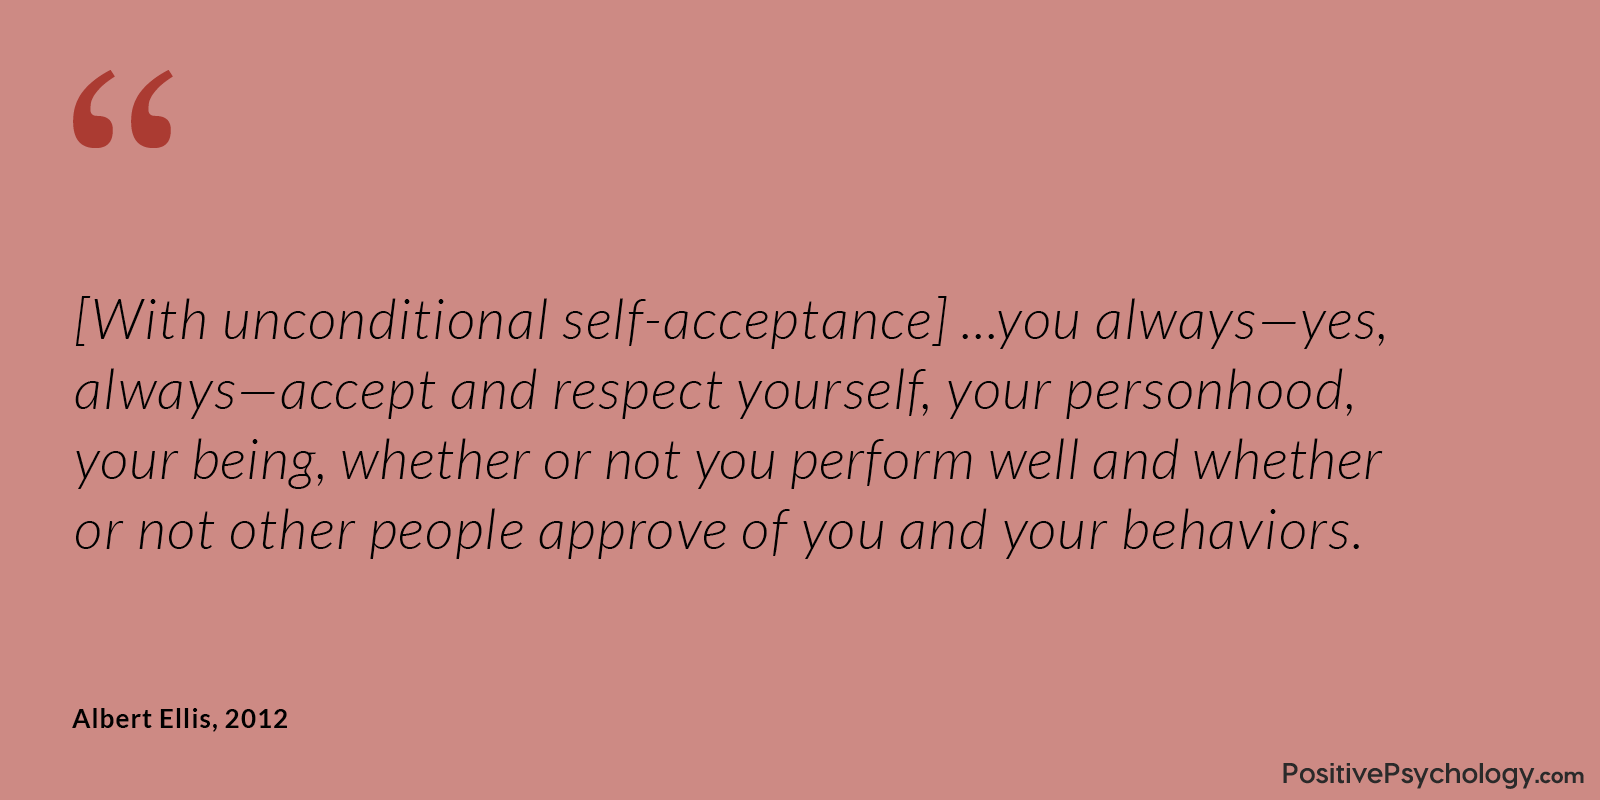 19 Self-Acceptance Quotes For Relating To Yourself In A Healthier Way